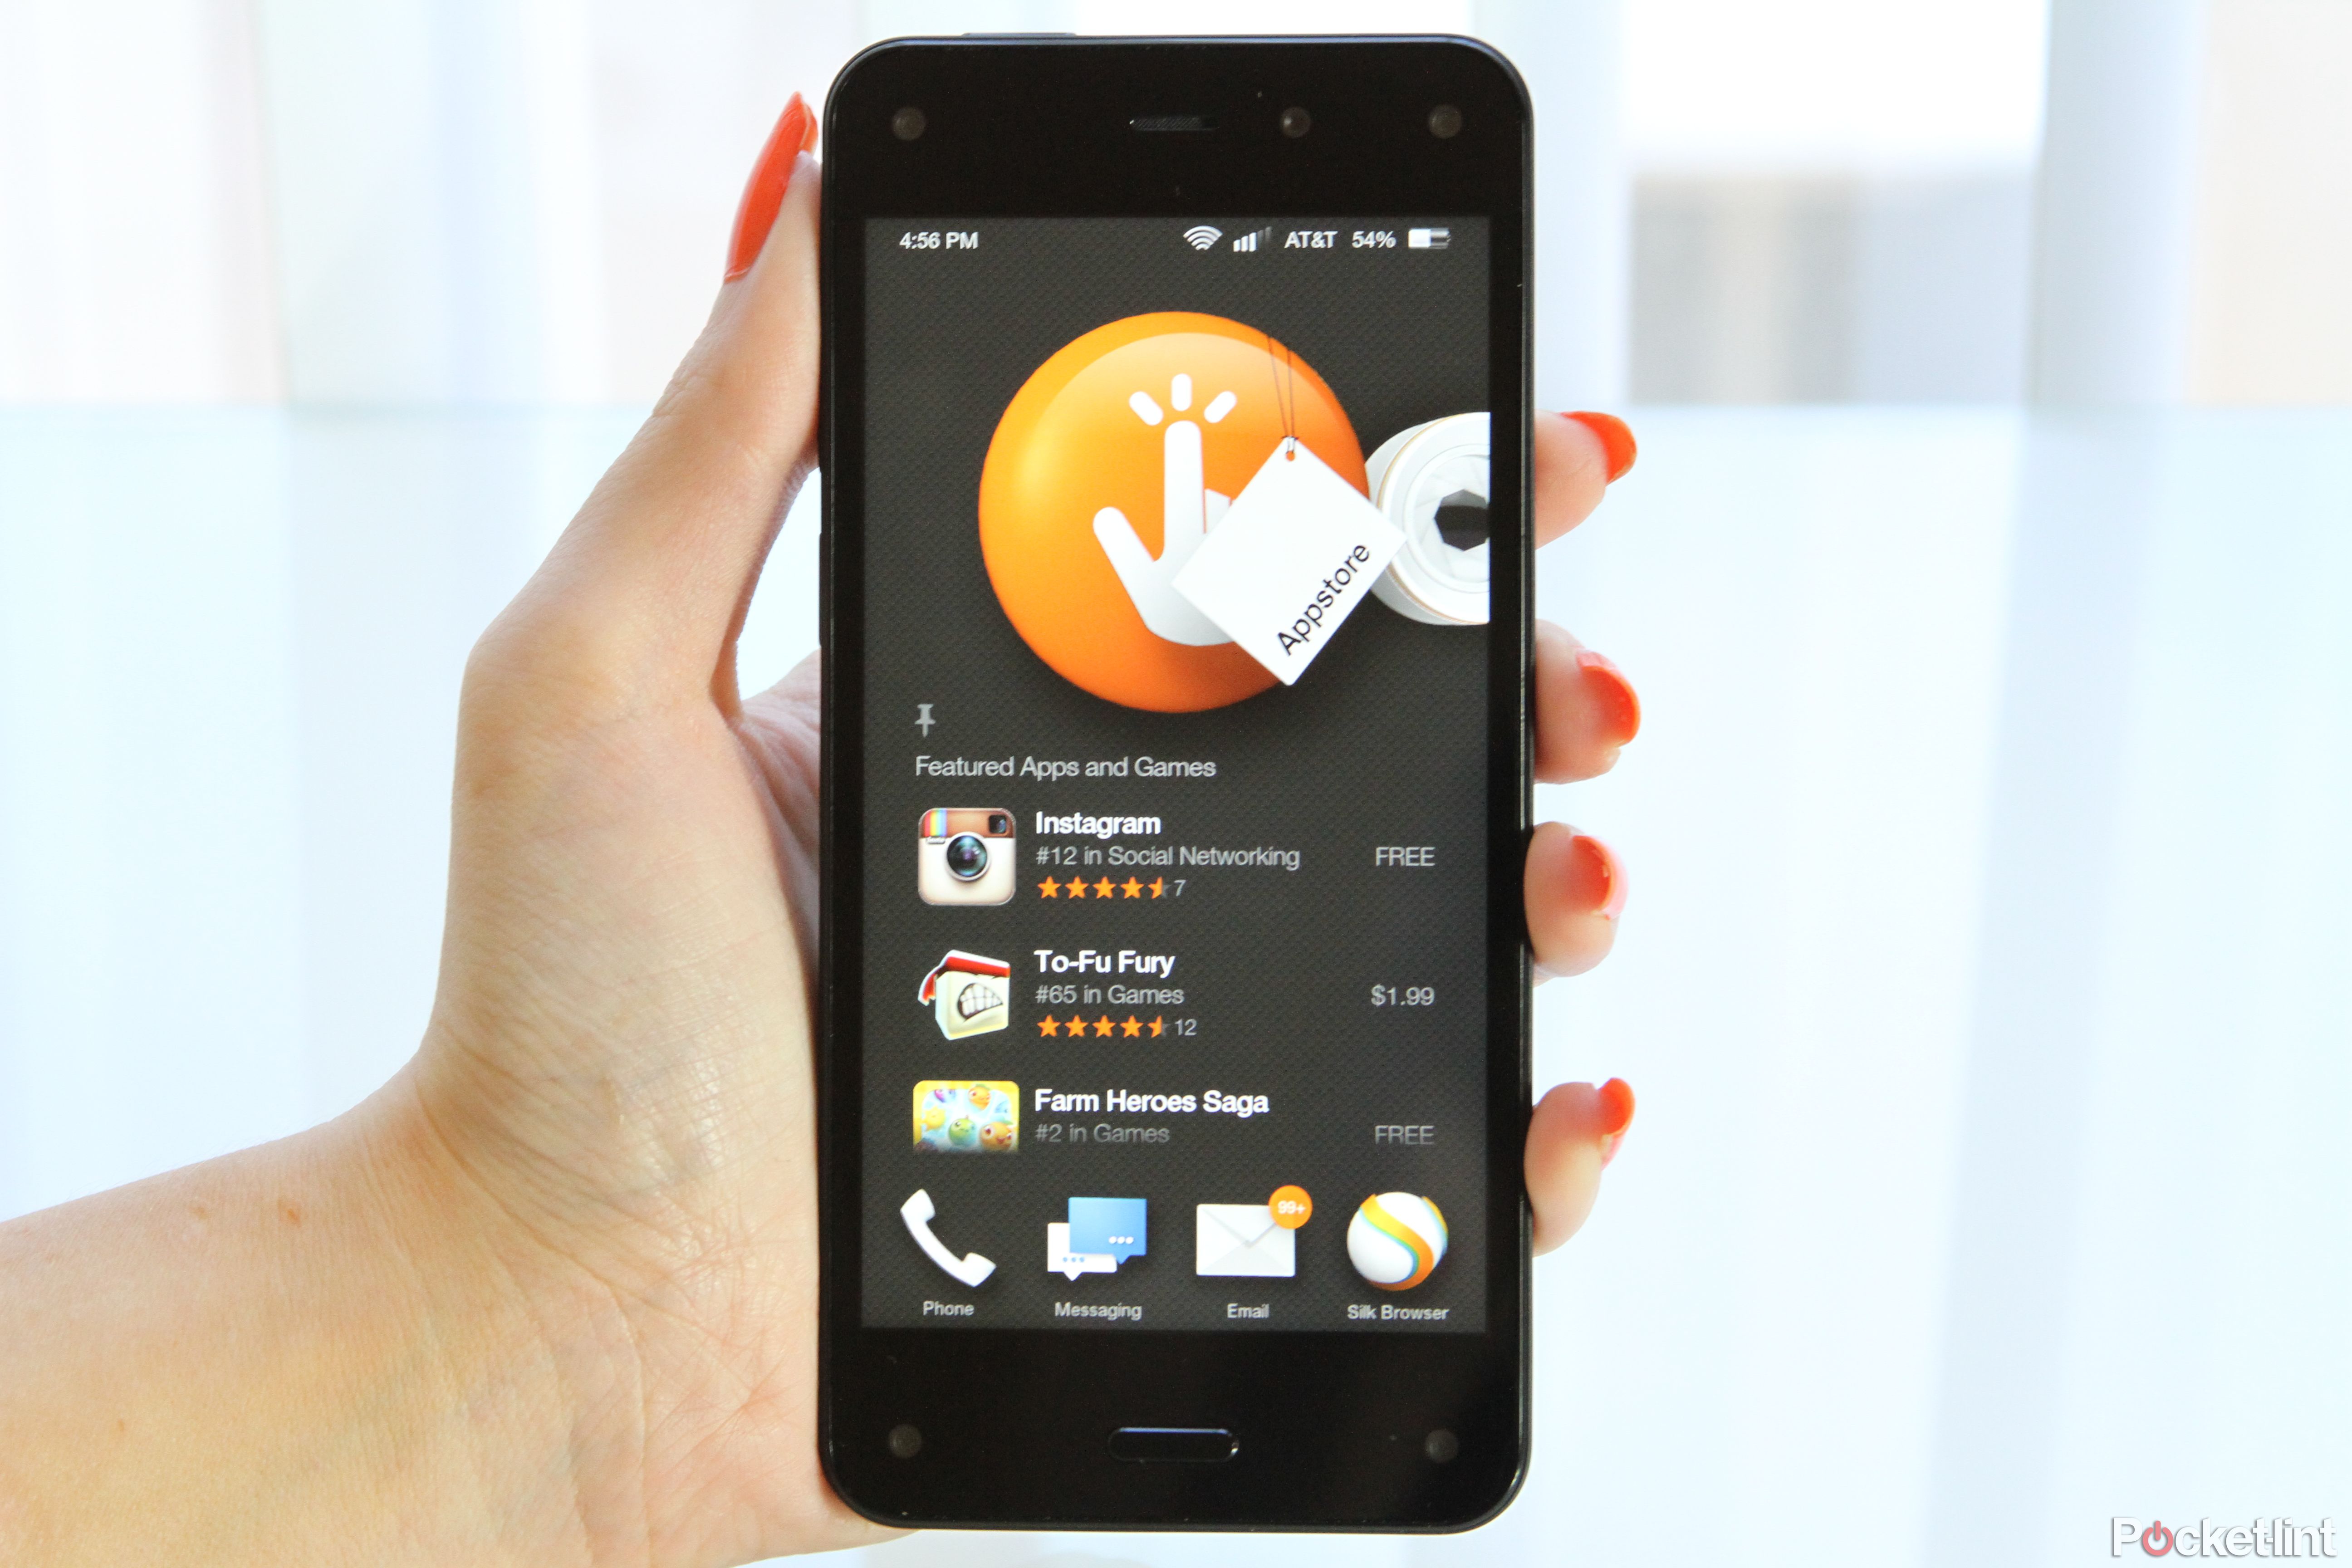 amazon fire phone review image 8